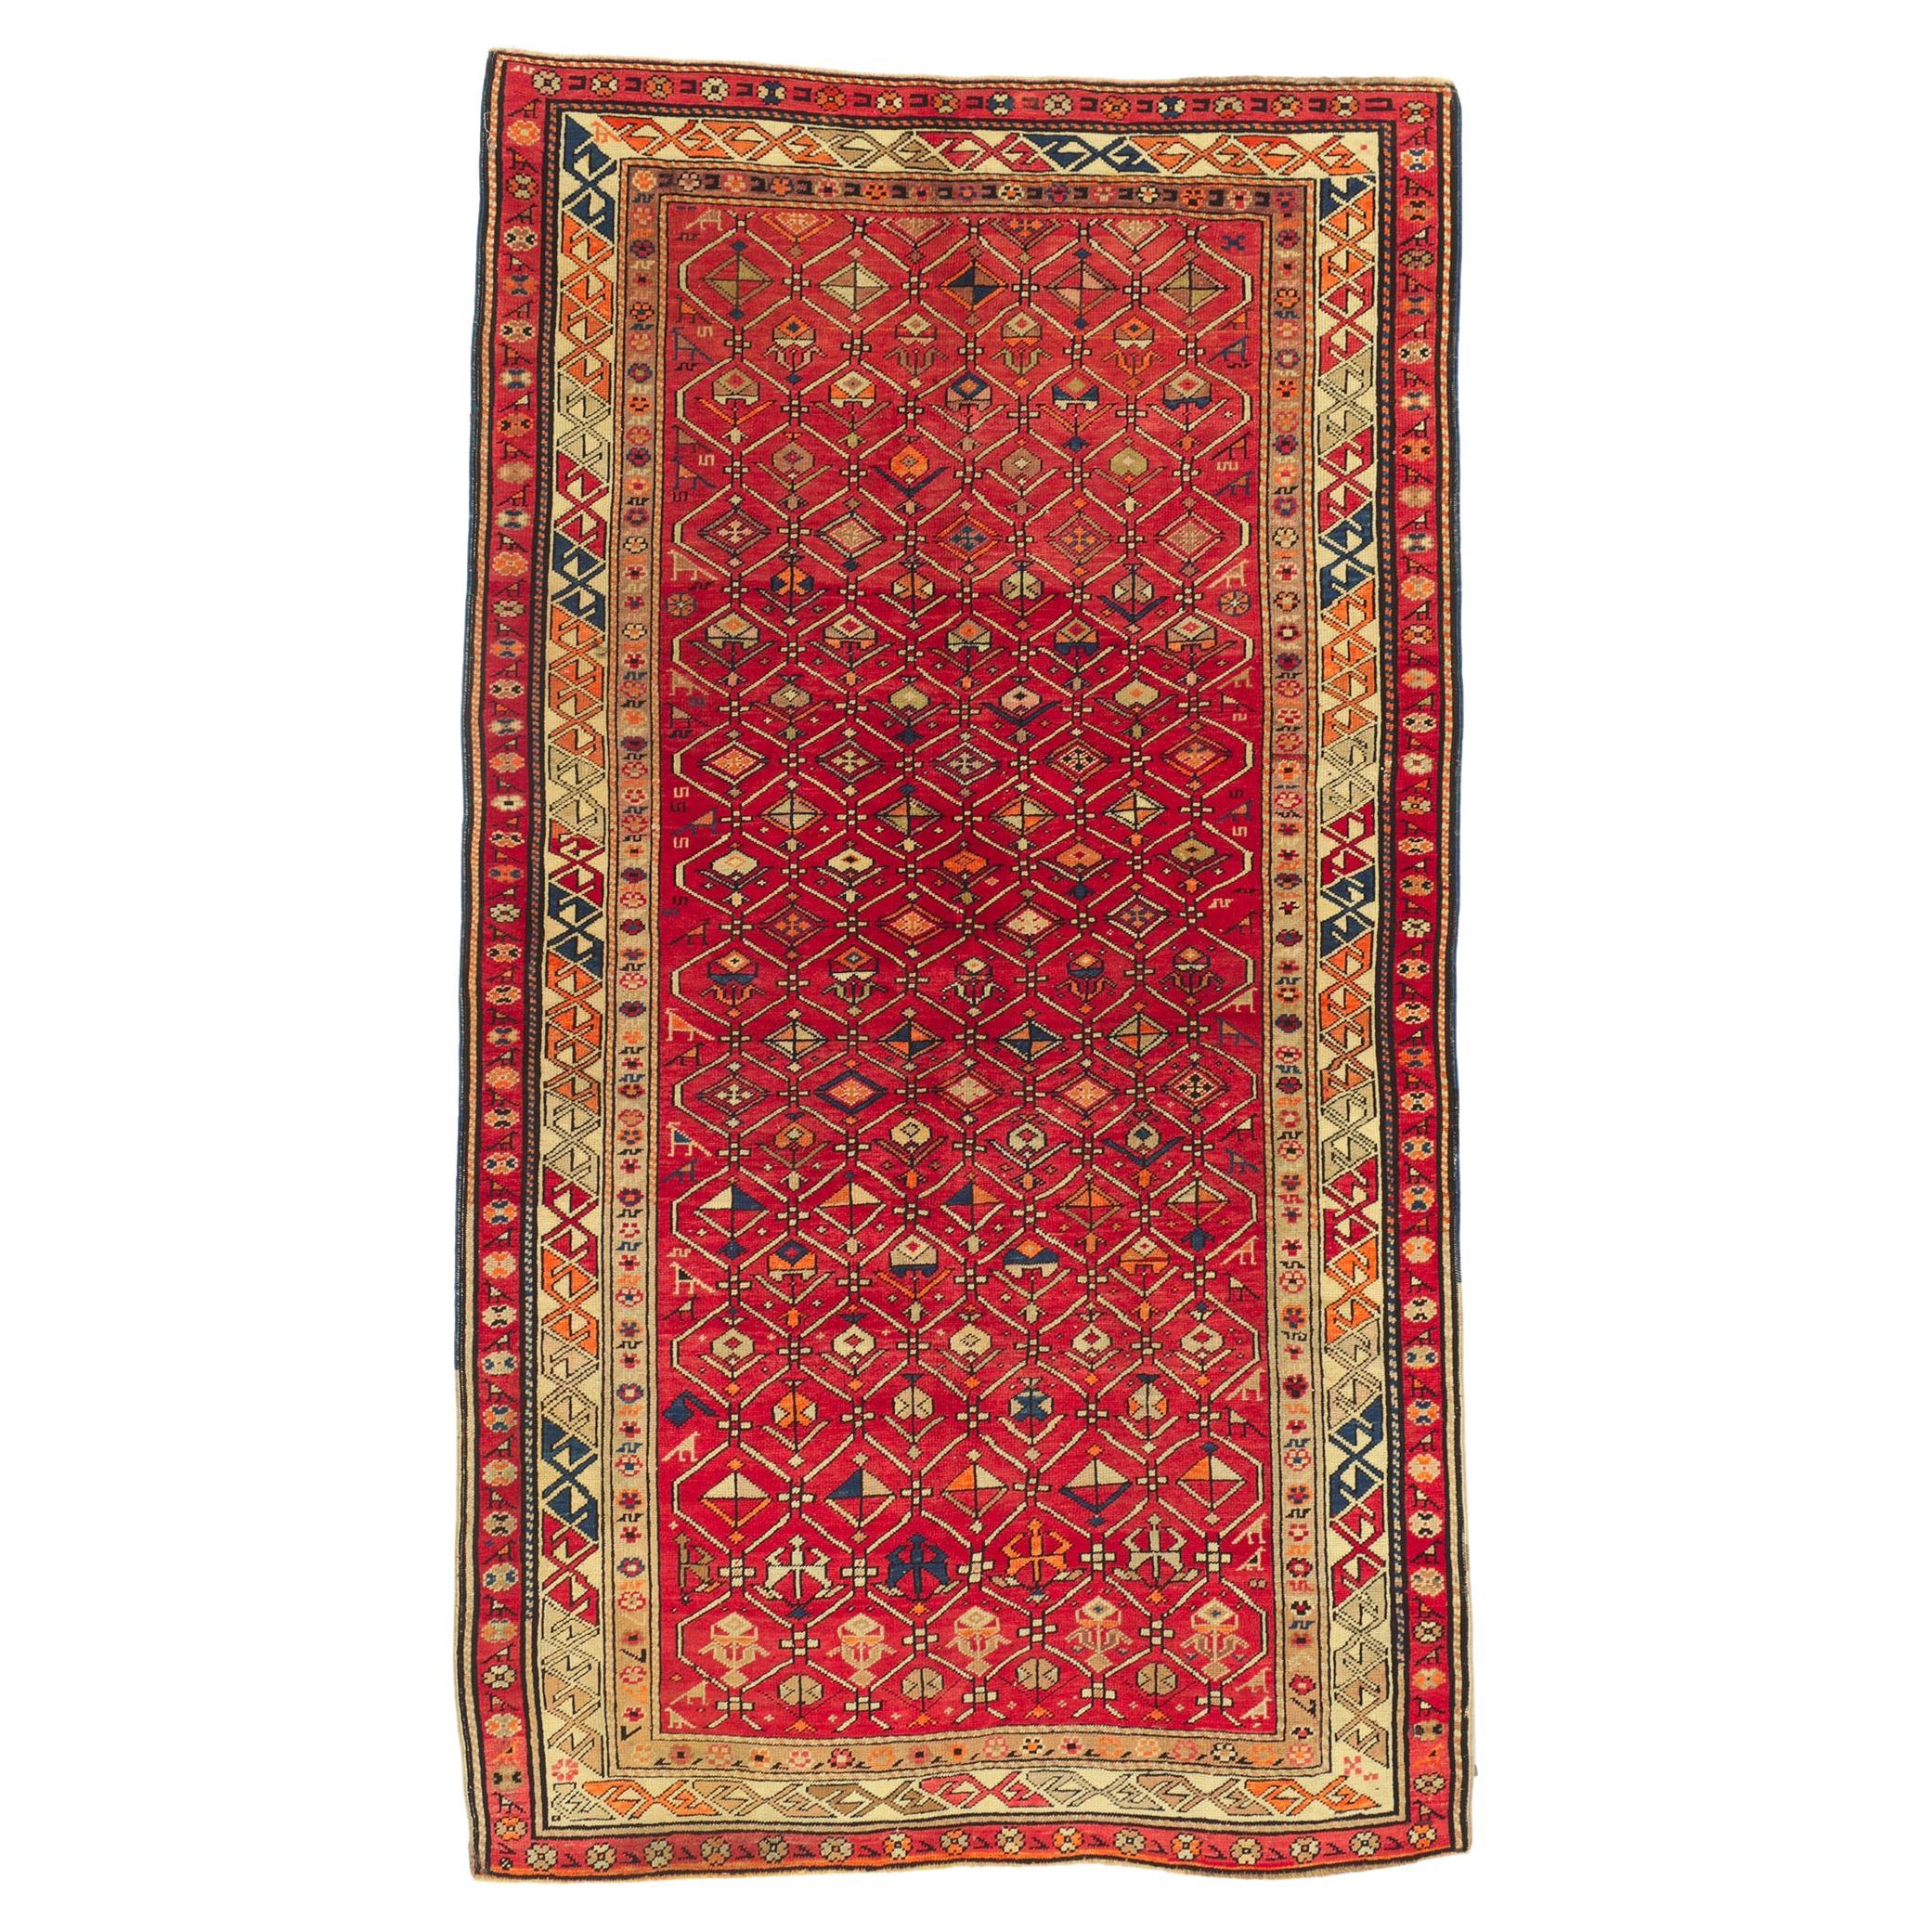 Vintage Turkish Tribal Oushak Rug with Vibrant Earth-Tone Colors For Sale